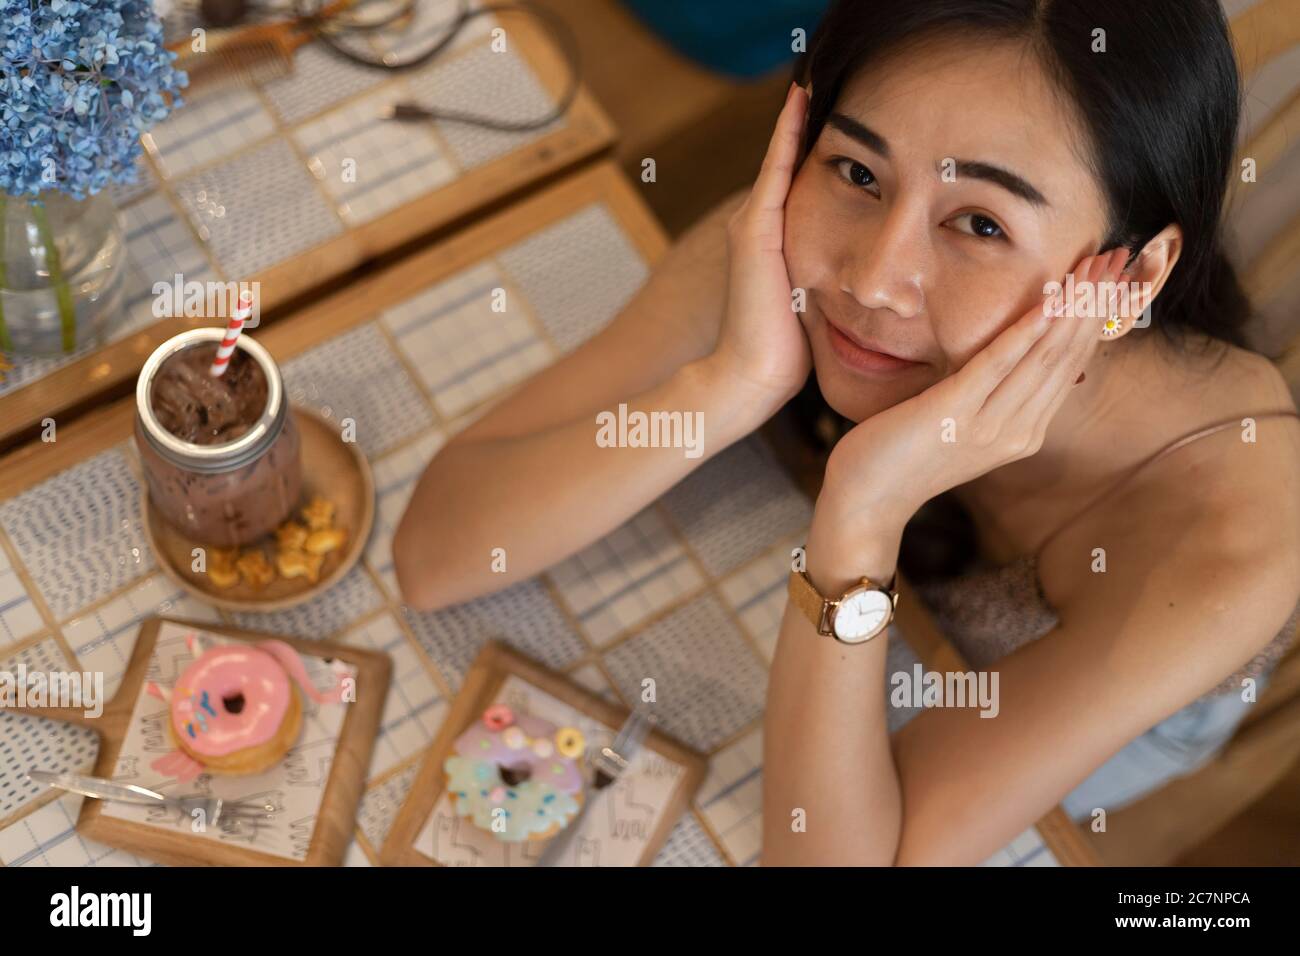 Top view young girl with  donut and beverage at a cafeteria. Stock Photo